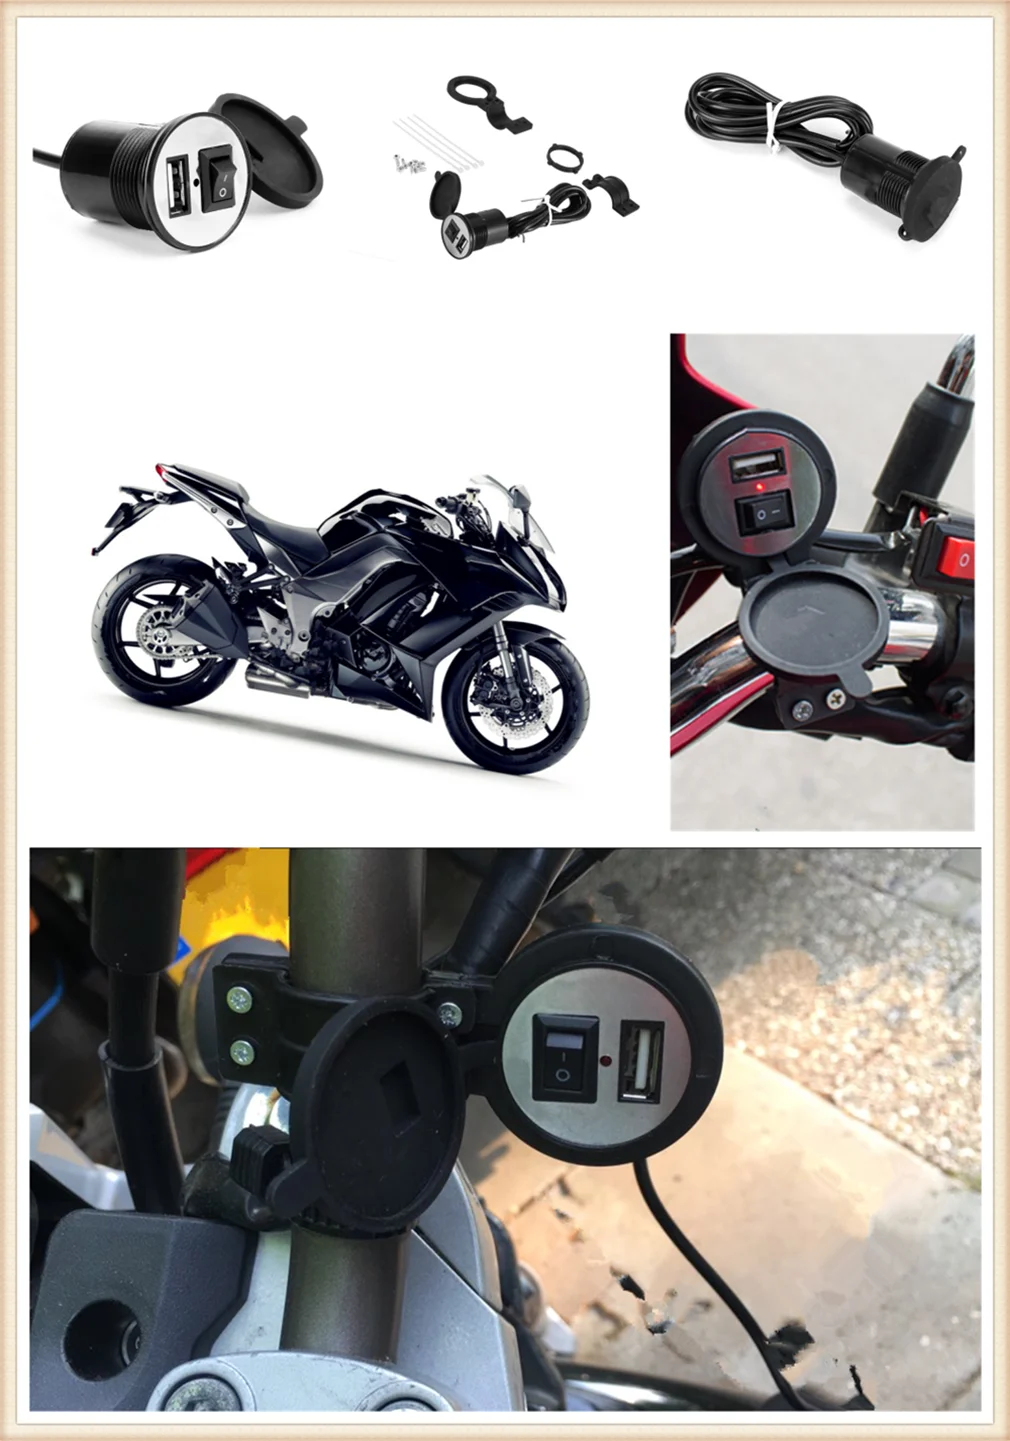 

12V-24VUniversal motorcycle modified shape USB charger with switch for YAMAHA R6S USA BT1100 Bulldog XJR400 1300 RACER 400R